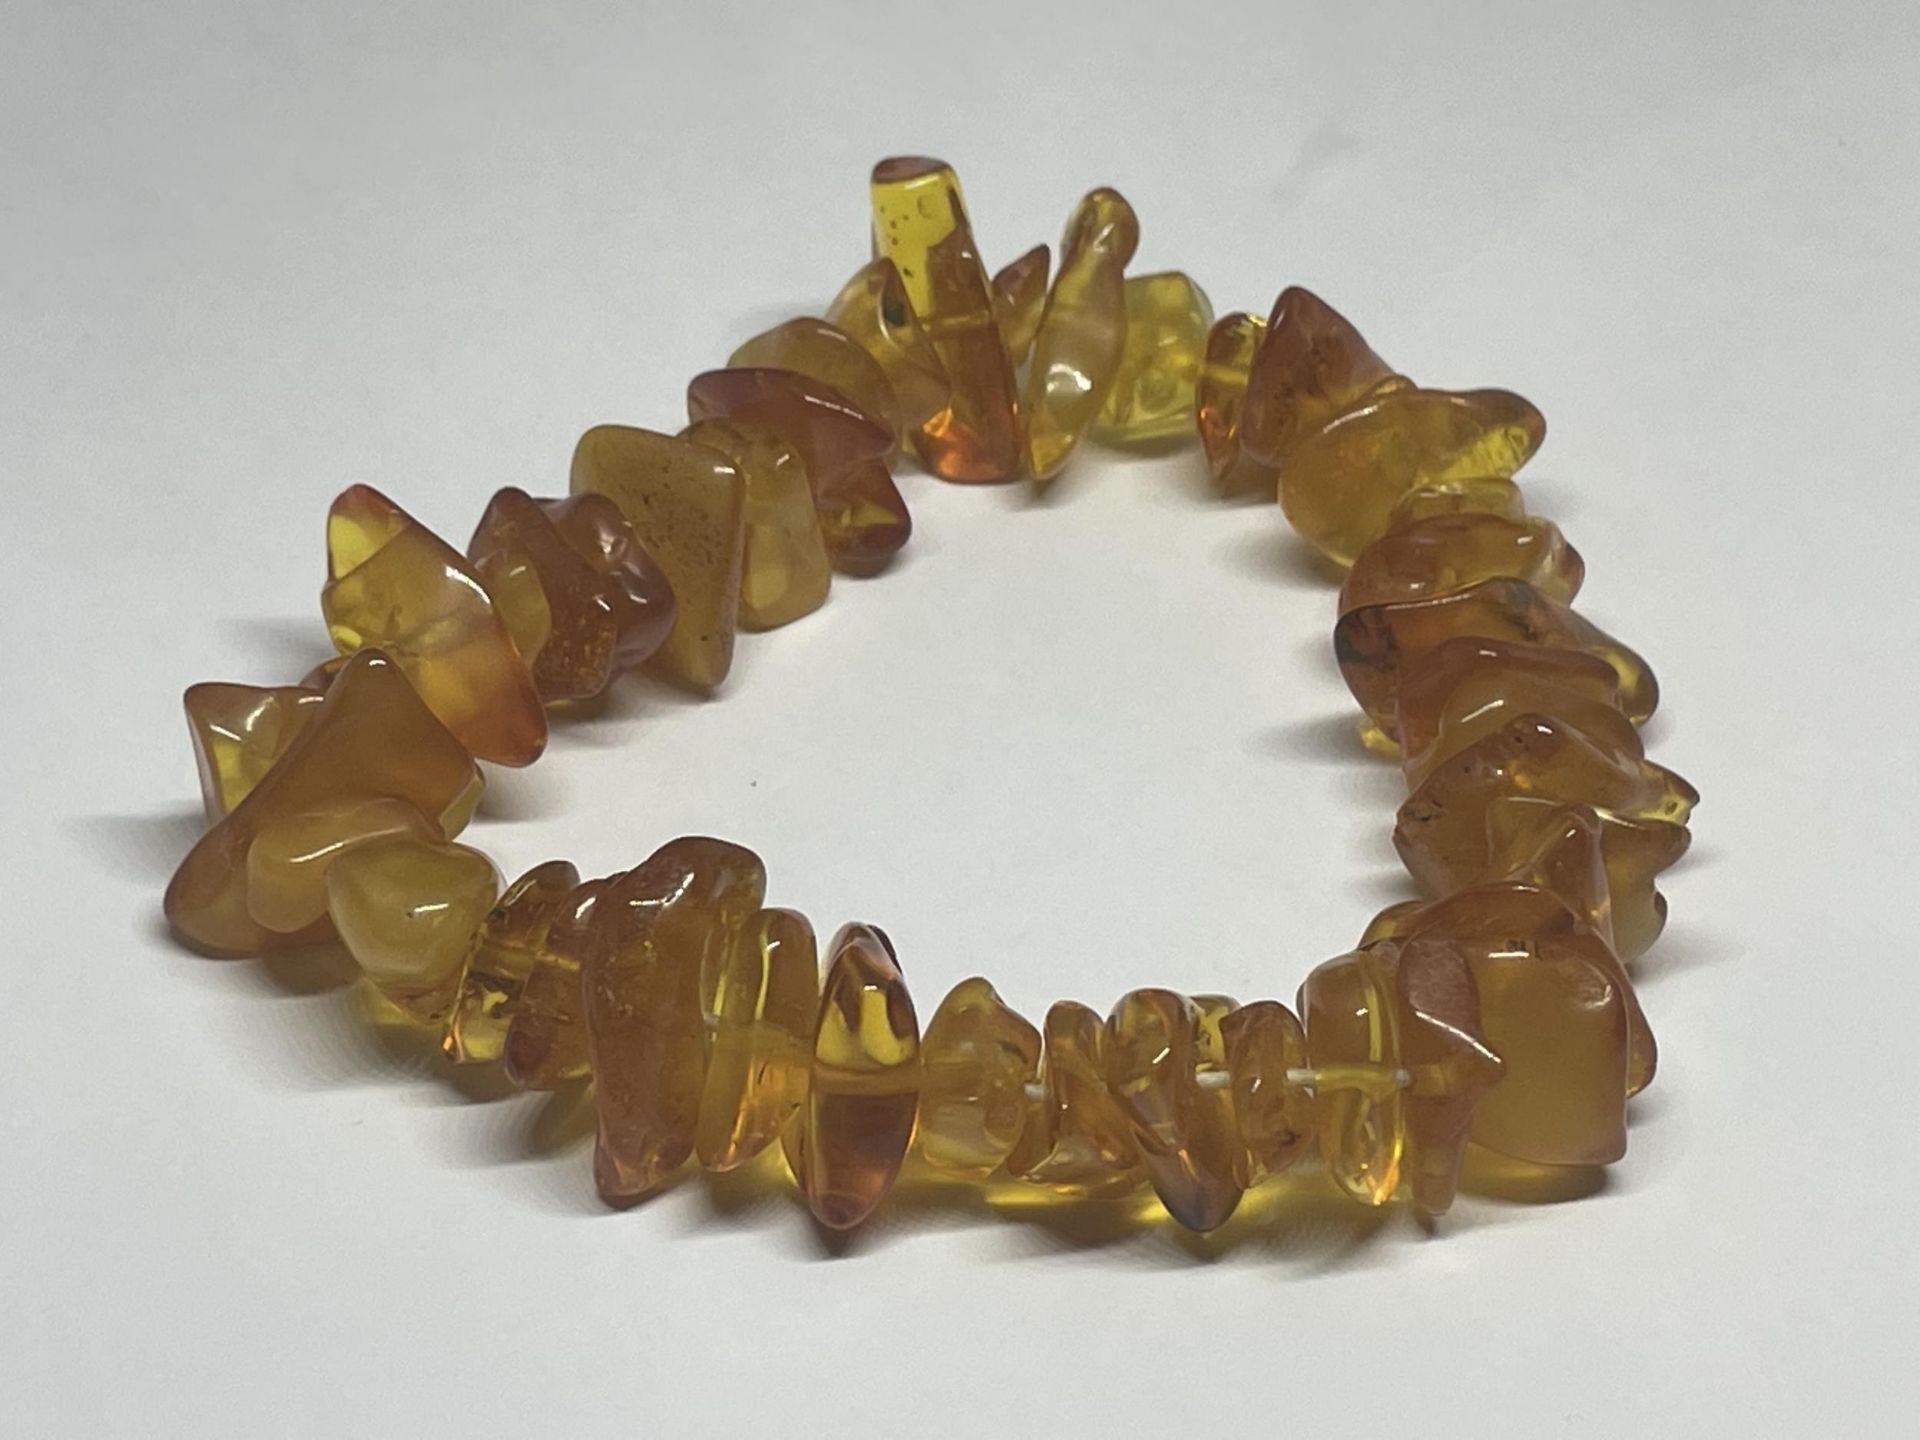 AN AMBER BRACELET WITH VARIOUS SHAPED STONES - Image 2 of 3